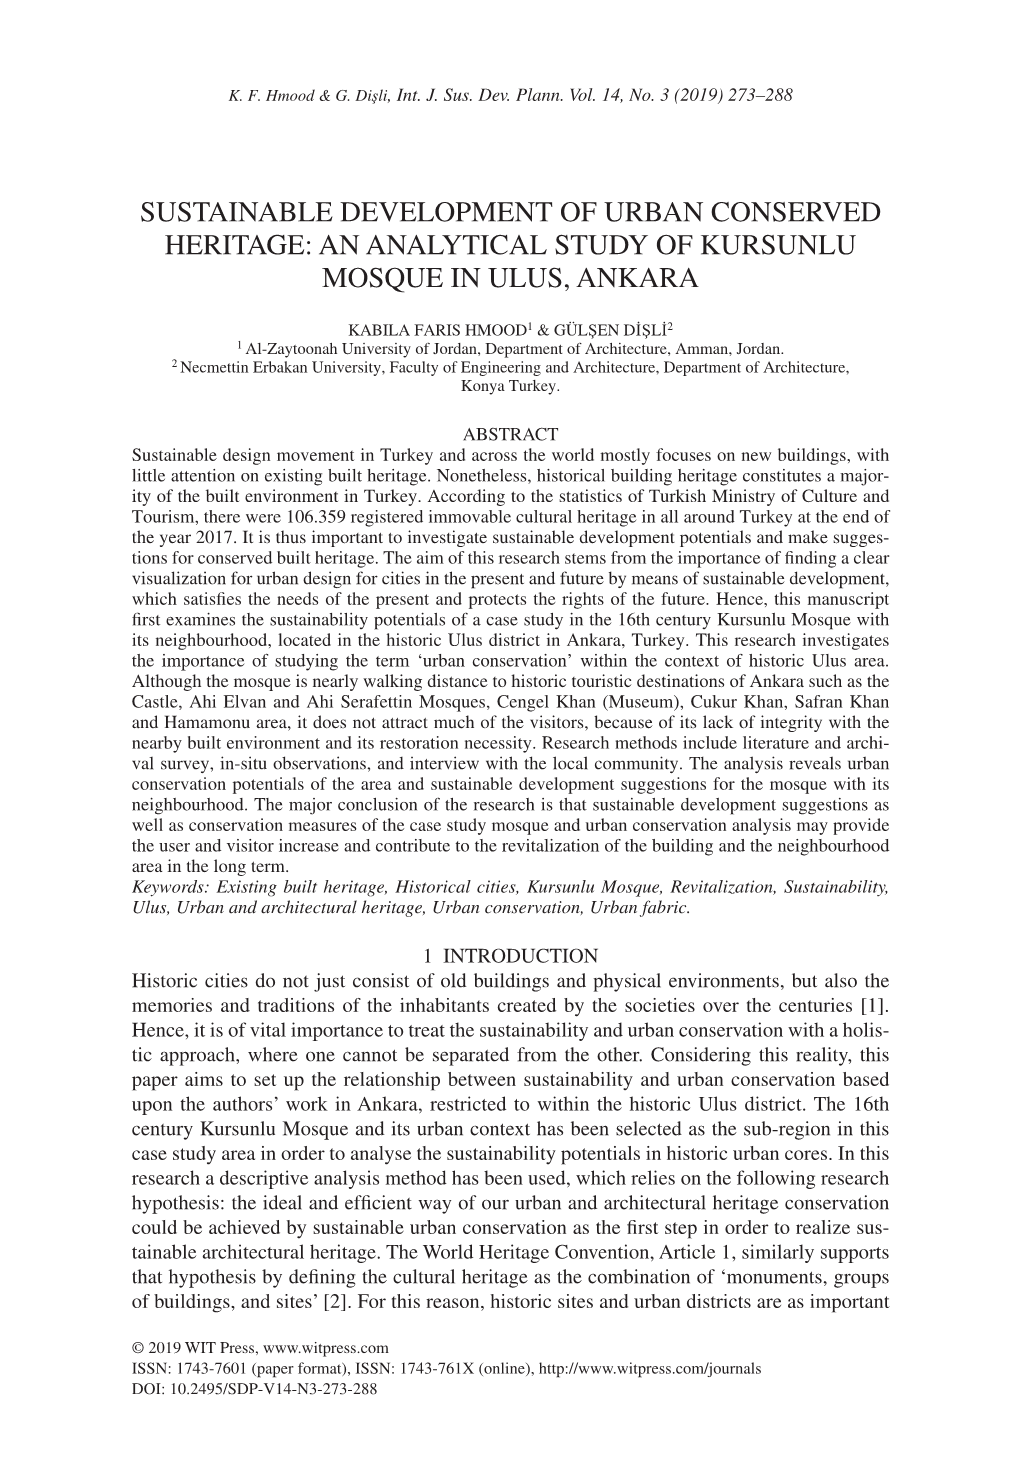 Sustainable Development of Urban Conserved Heritage: an Analytical Study of Kursunlu Mosque in Ulus, Ankara